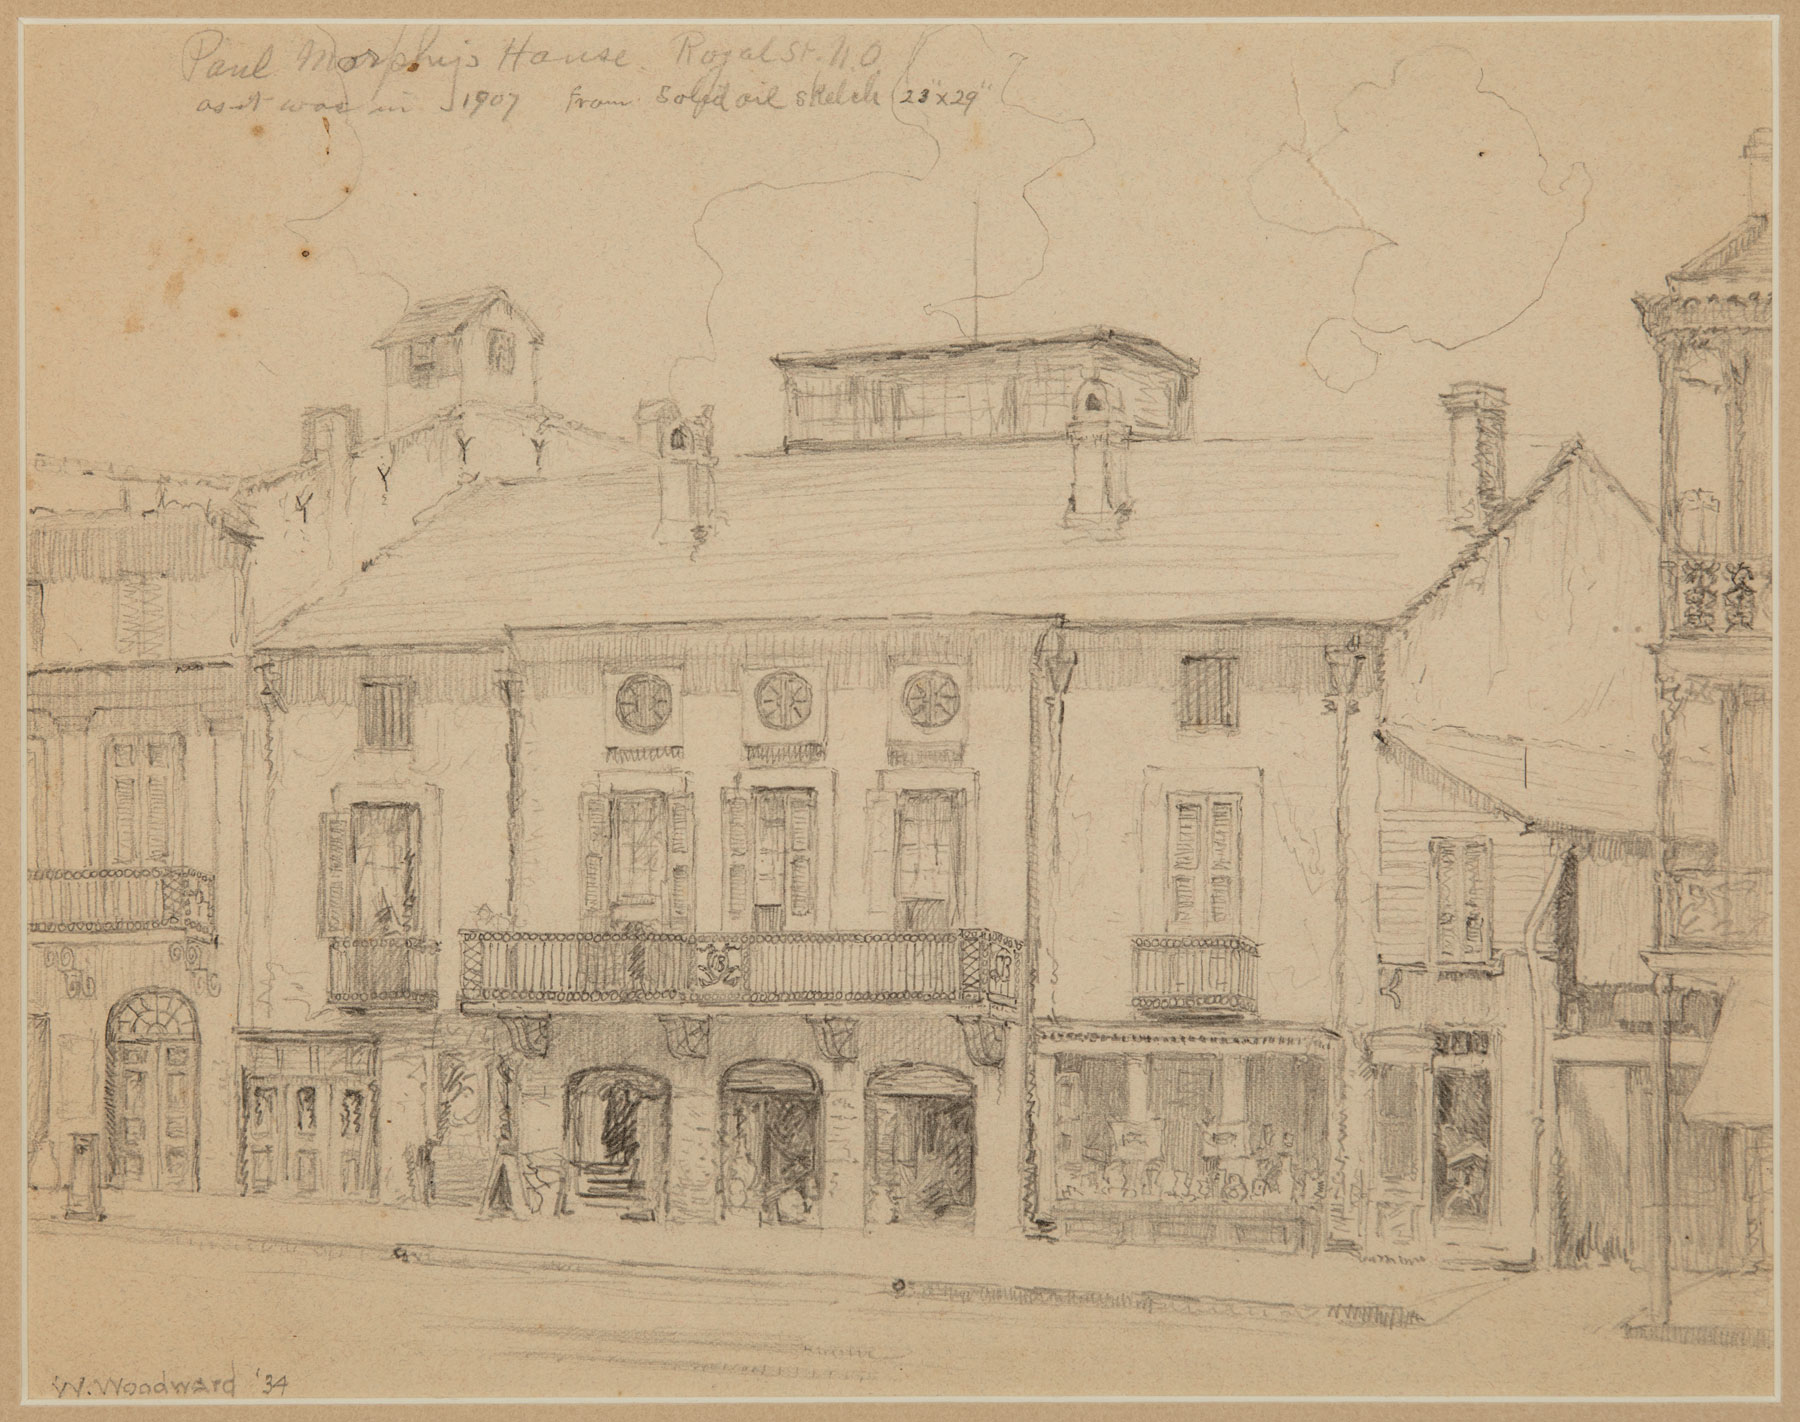 William Woodward (American/Louisiana, 1859-1939) , "Paul Morphy's House Royal St.", 1934, graphite